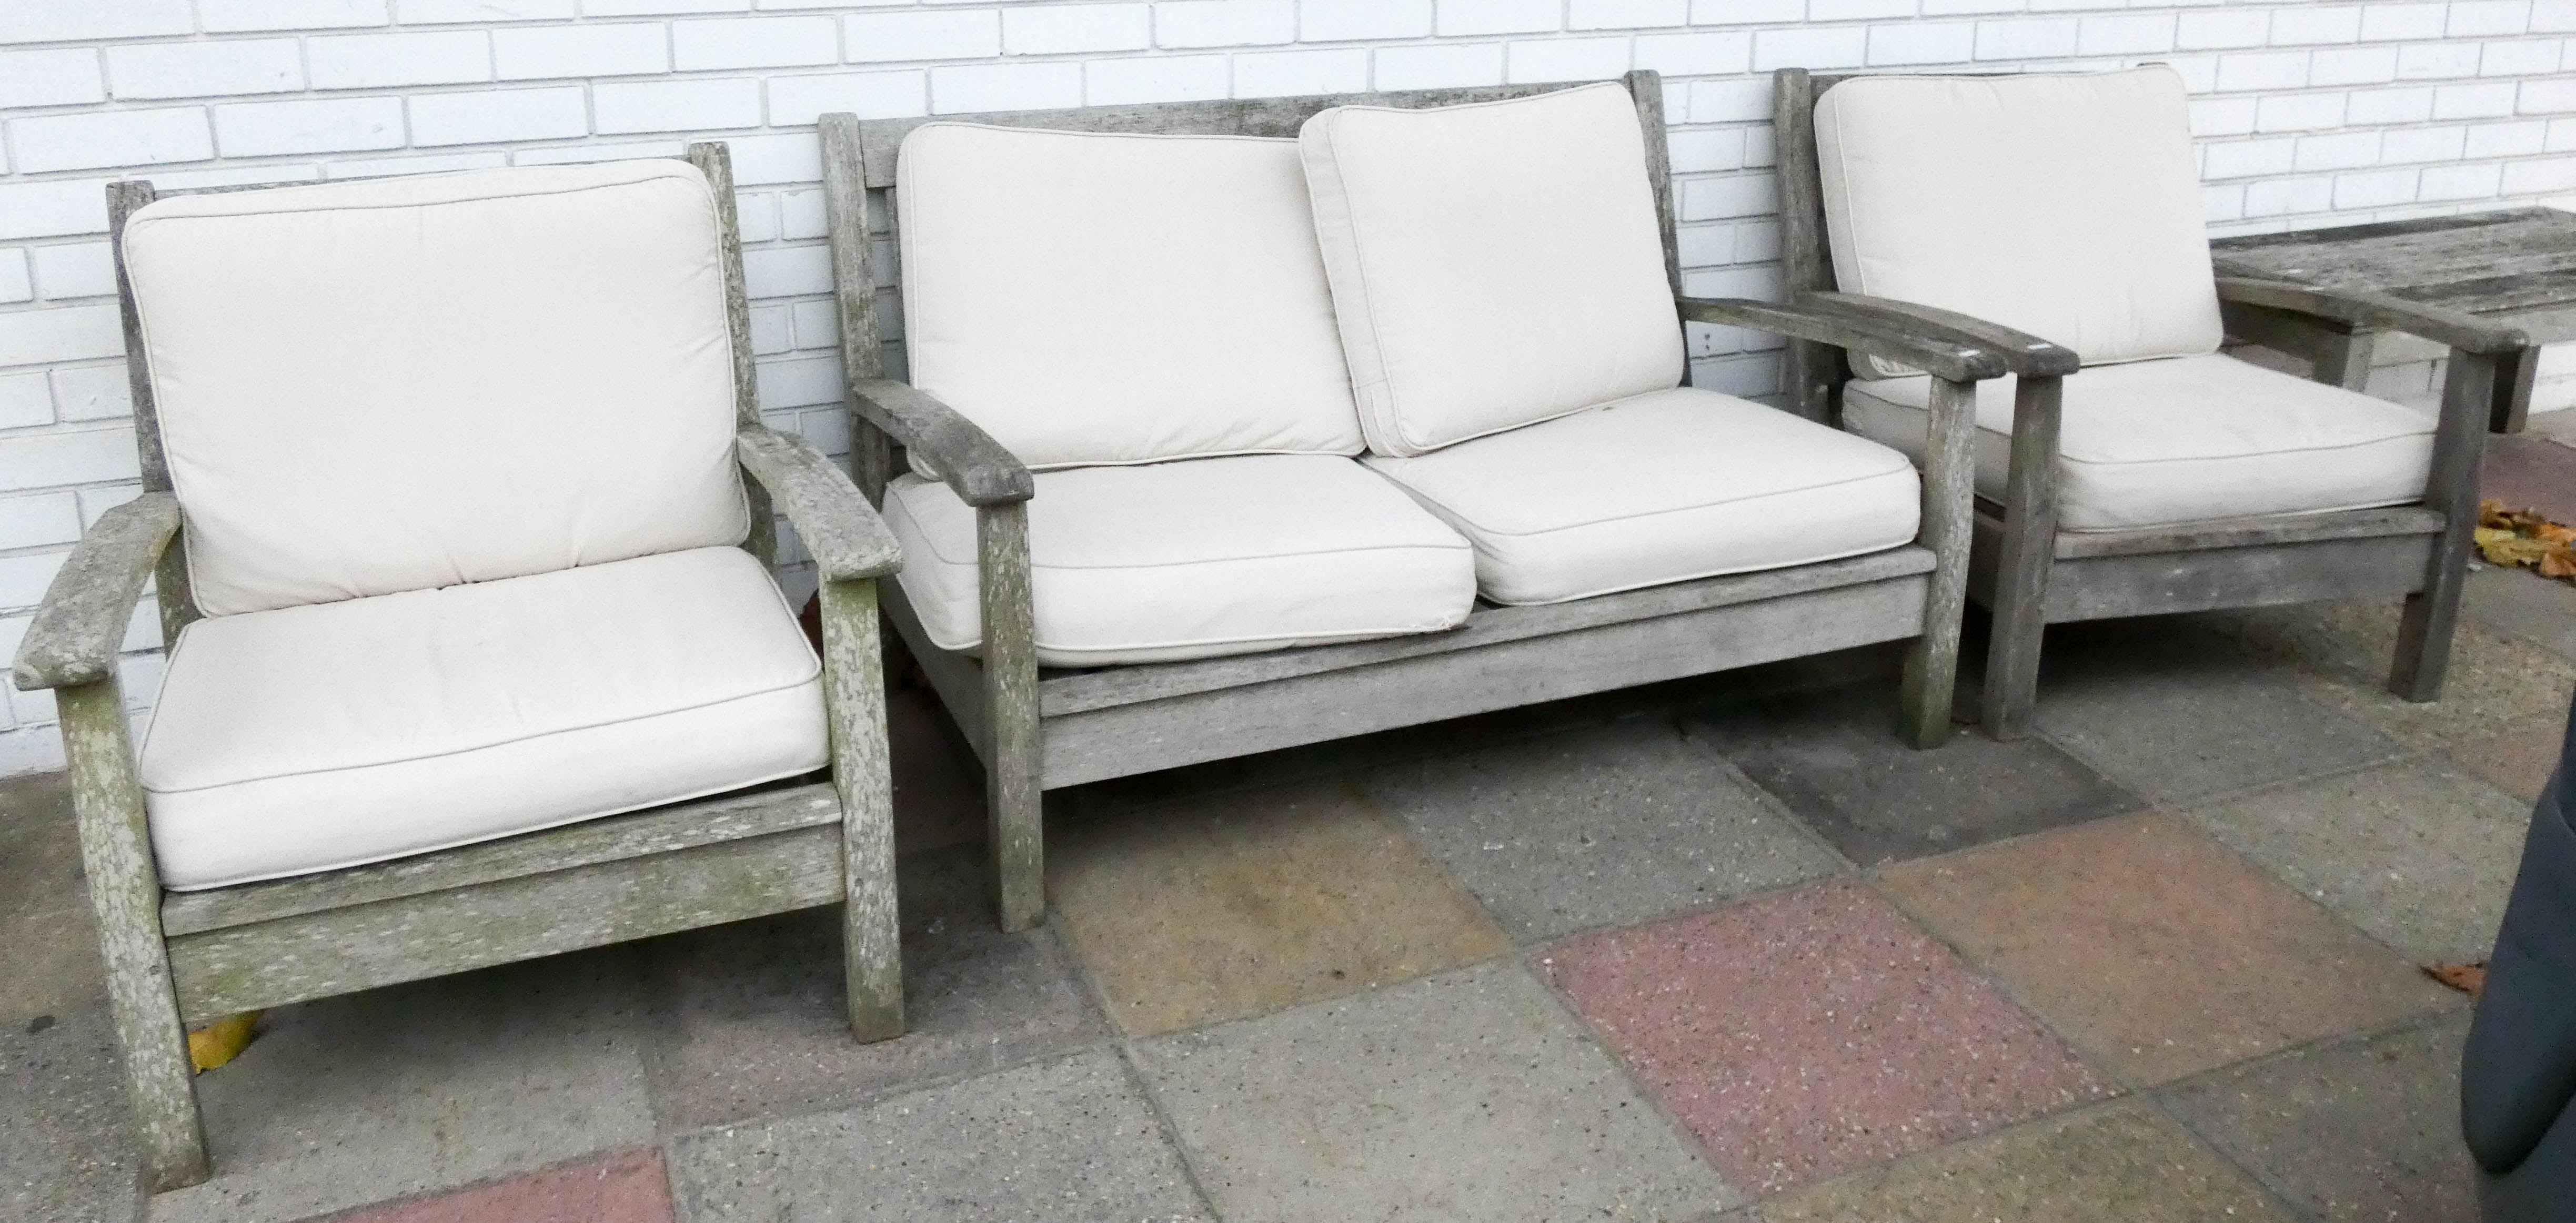 A heavy teak garden bench with faun coloured cushions and two matching chairs with side table